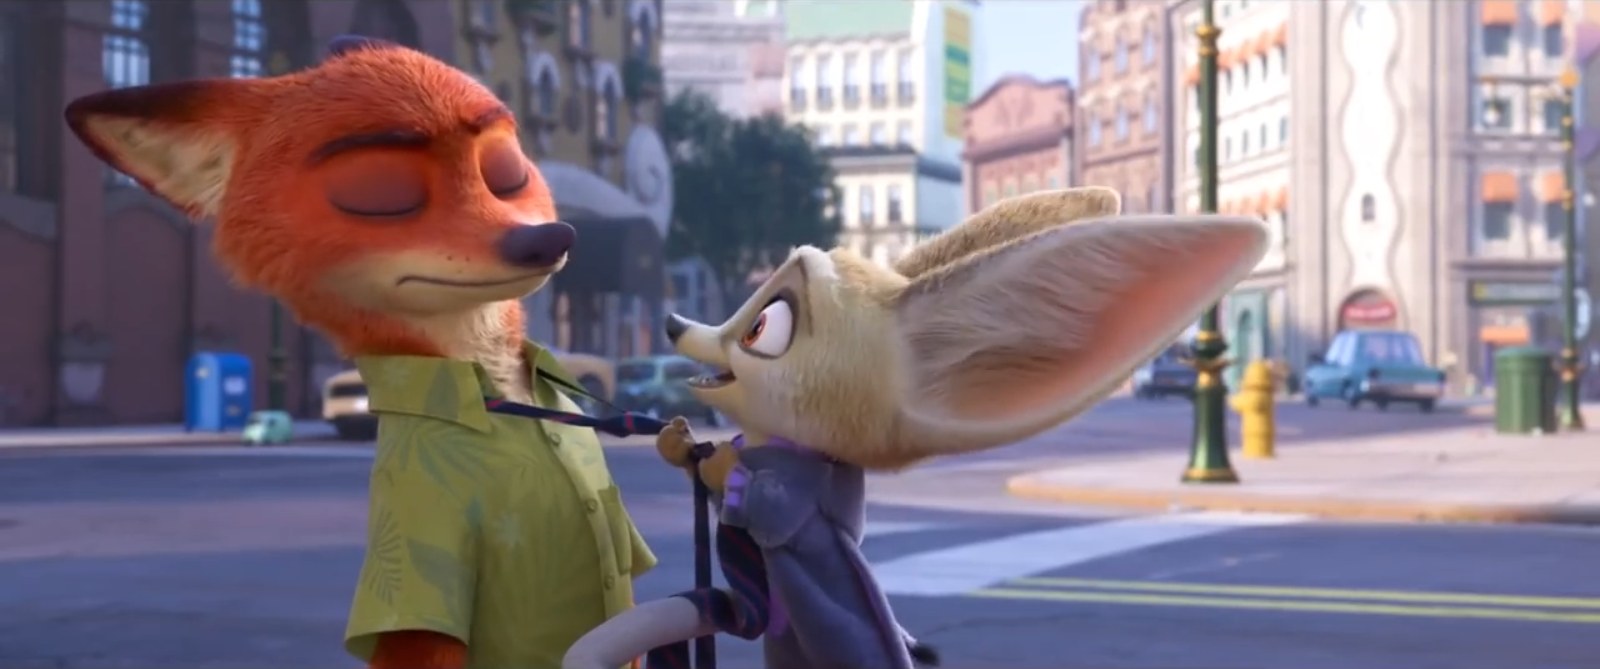 Image Youre A Cop Now Finnickpng Zootopia Wiki Fandom